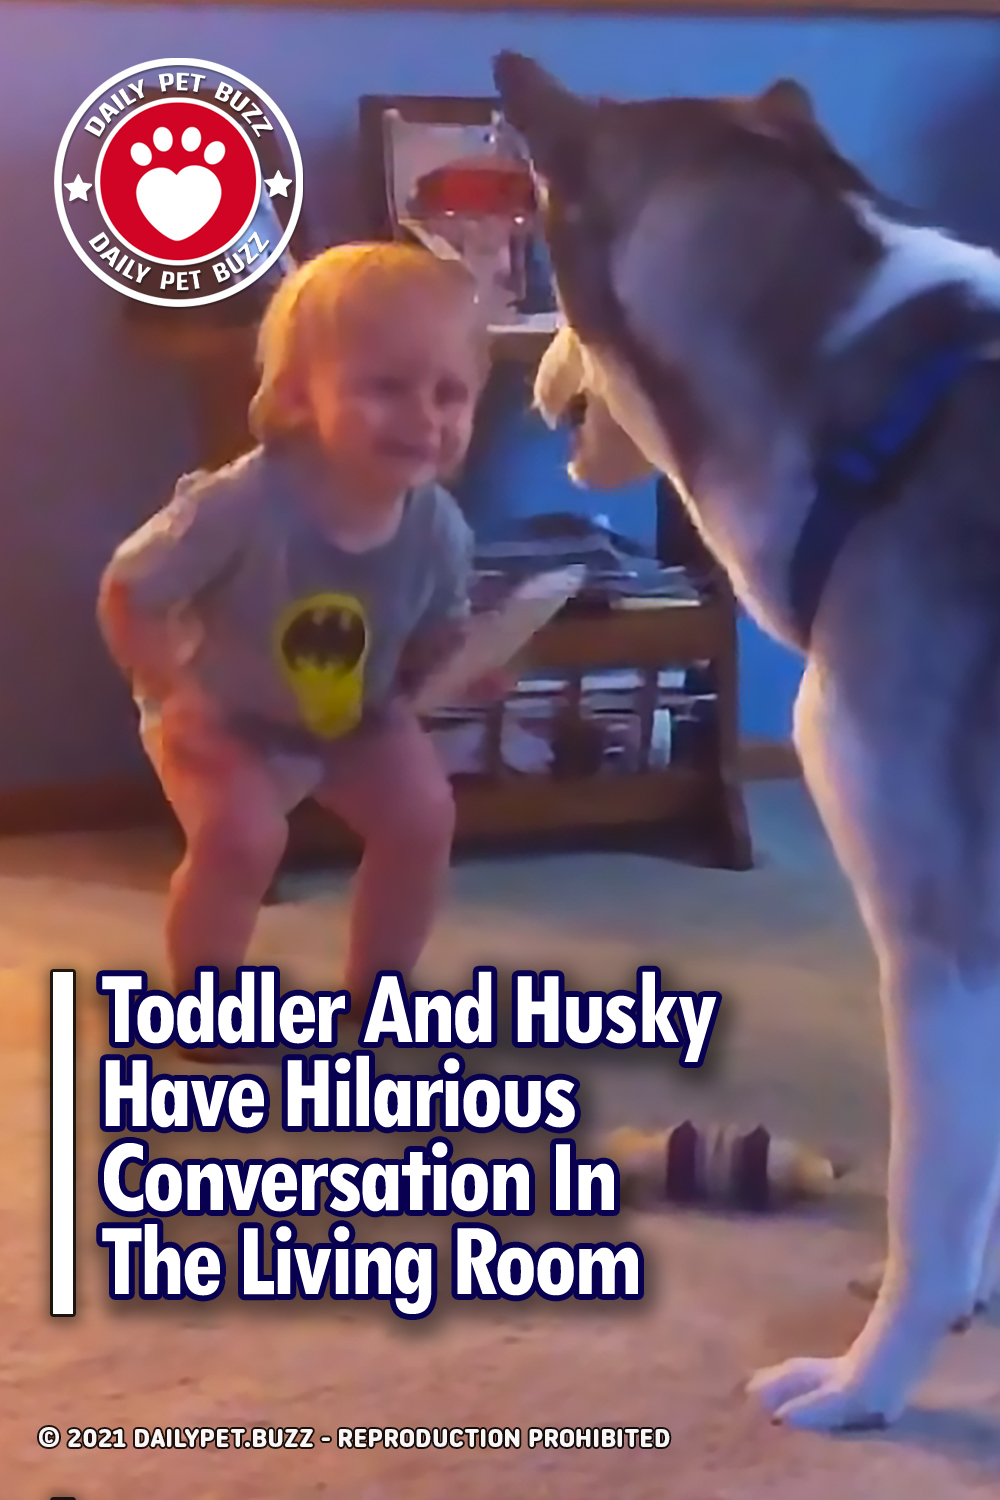 Toddler And Husky Have Hilarious Conversation In The Living Room